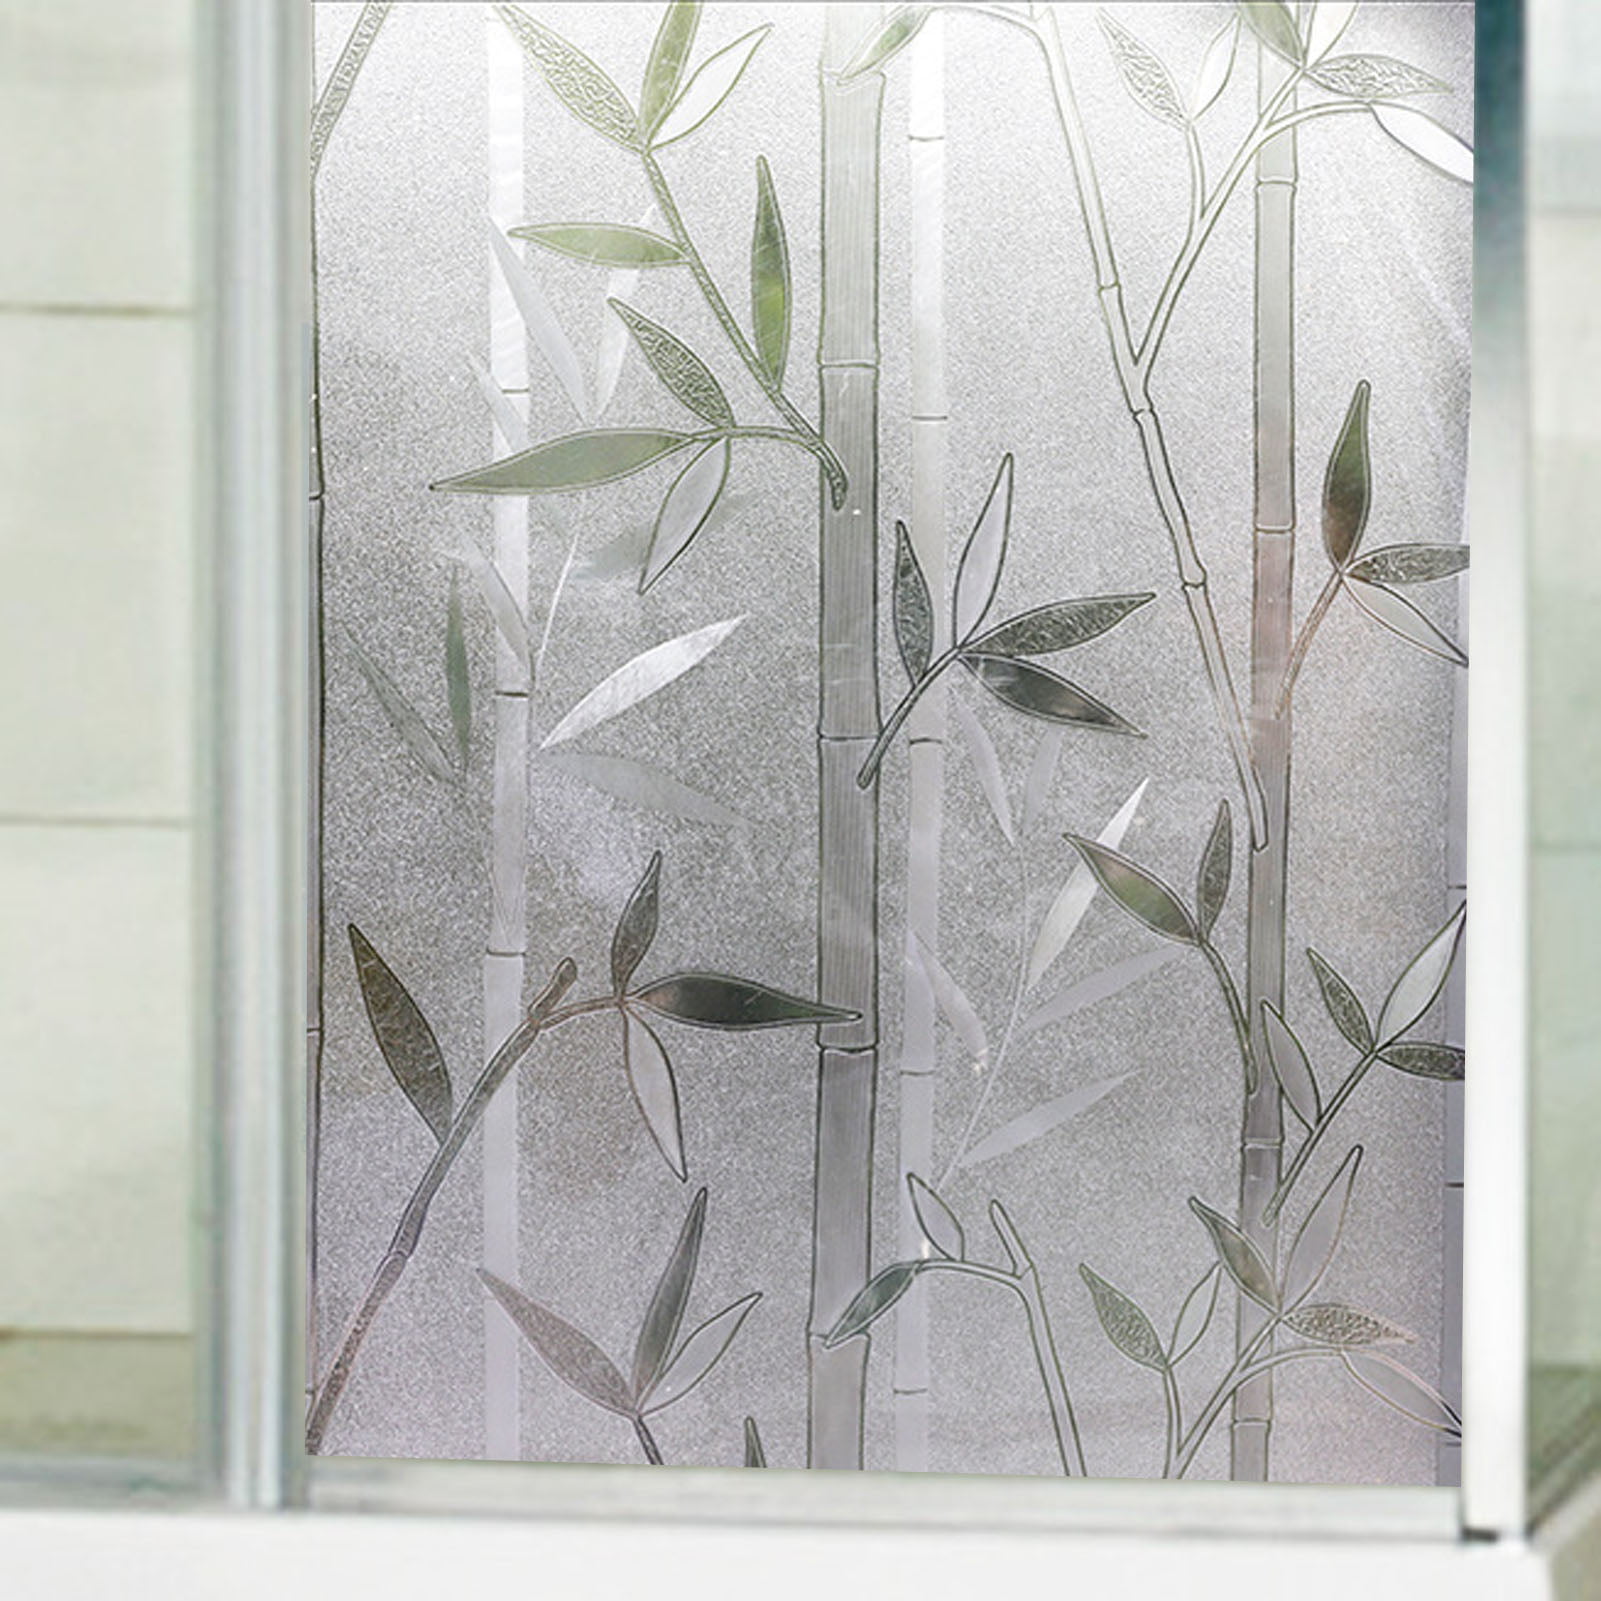 Frogued Window Stickers 3D Self Adhesive PVC Decorative DIY Glass Film for  Bathroom (Type 3,200cm)